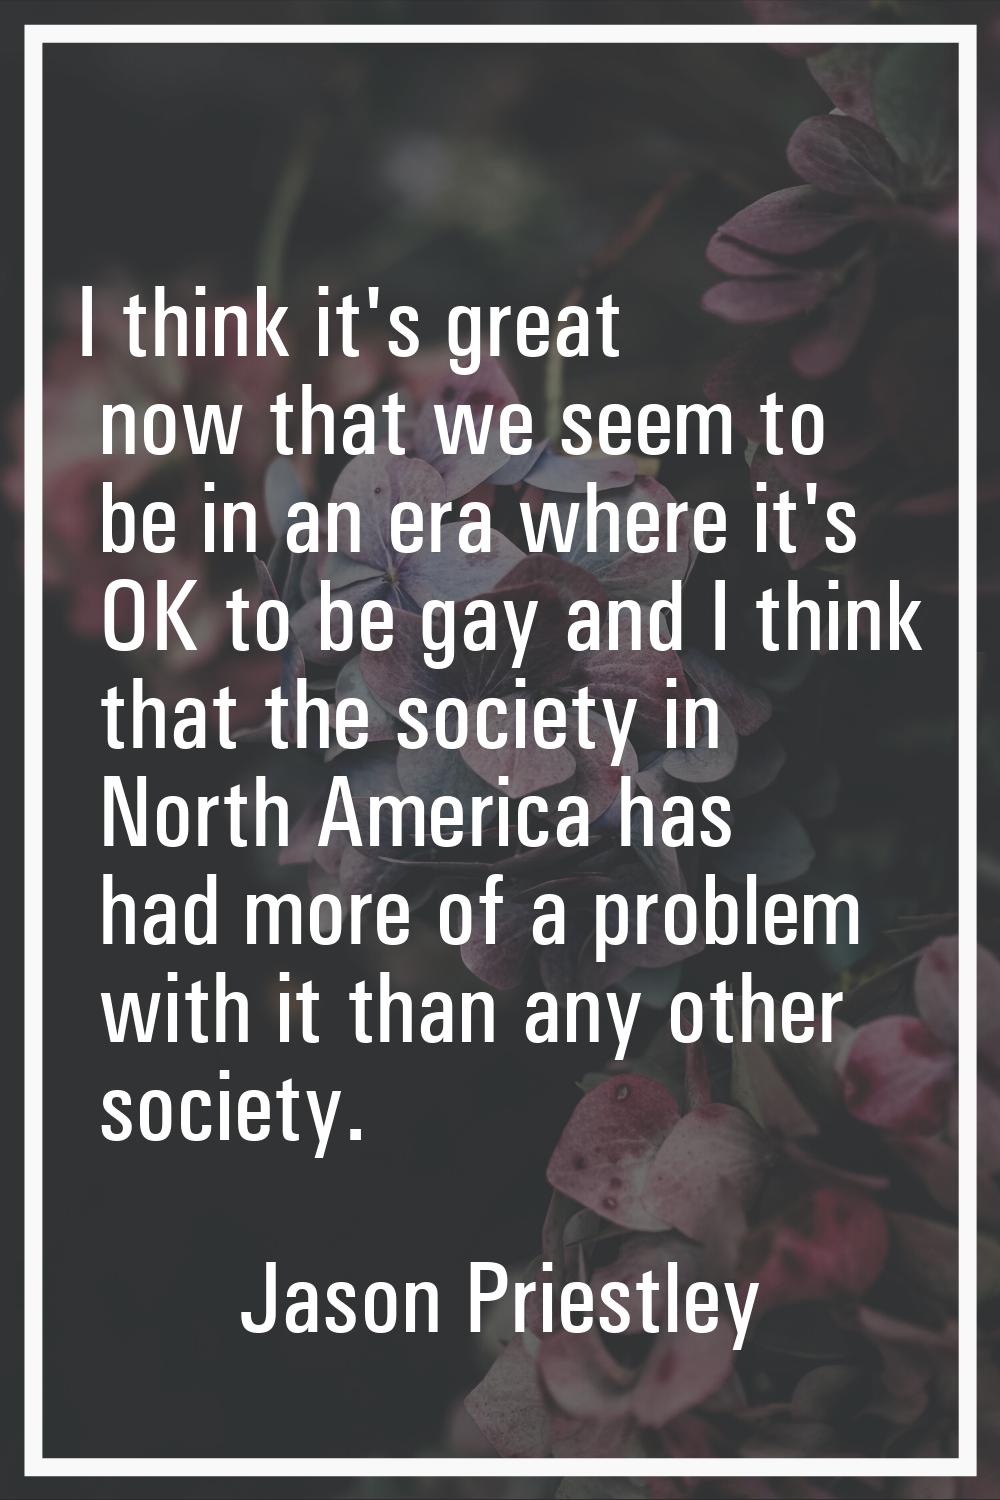 I think it's great now that we seem to be in an era where it's OK to be gay and I think that the so